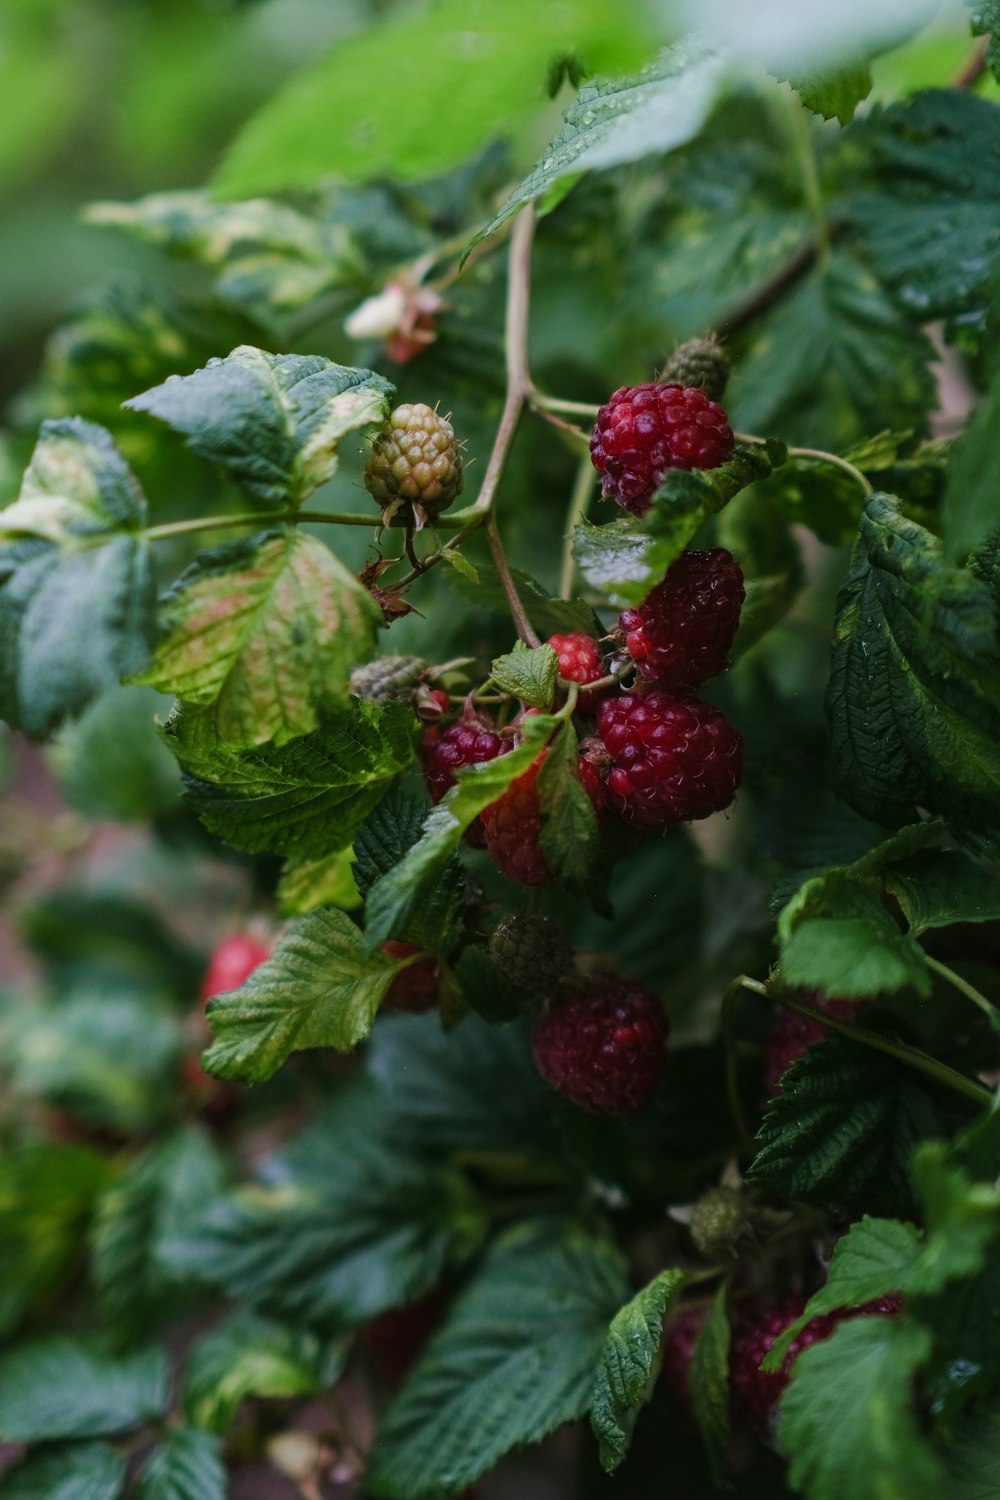 raspberries growing on a bush with green leaves